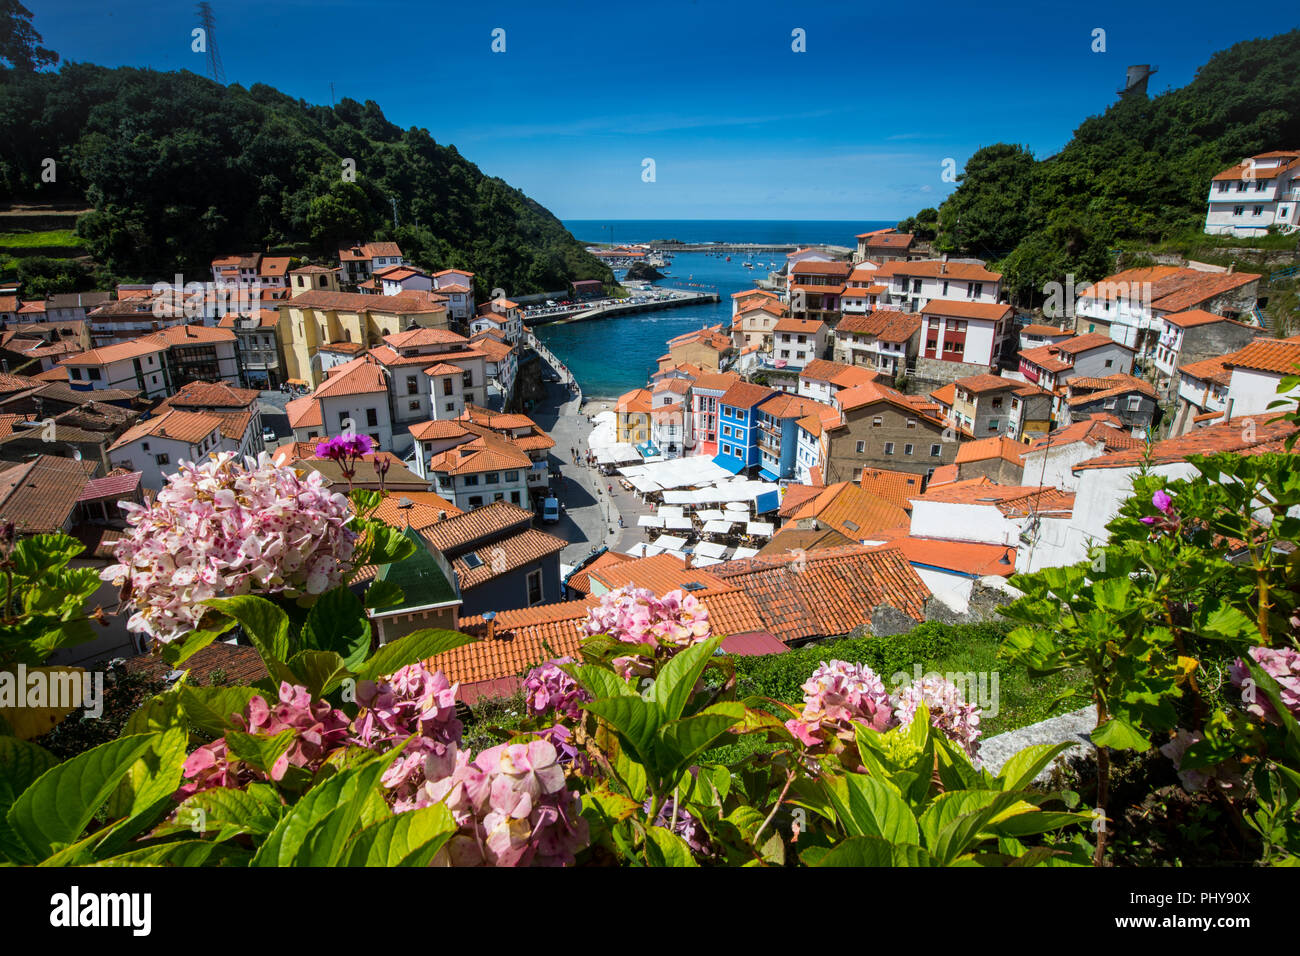 The fishing village of Cudillero in Asturias, North West Spain. Stock Photo